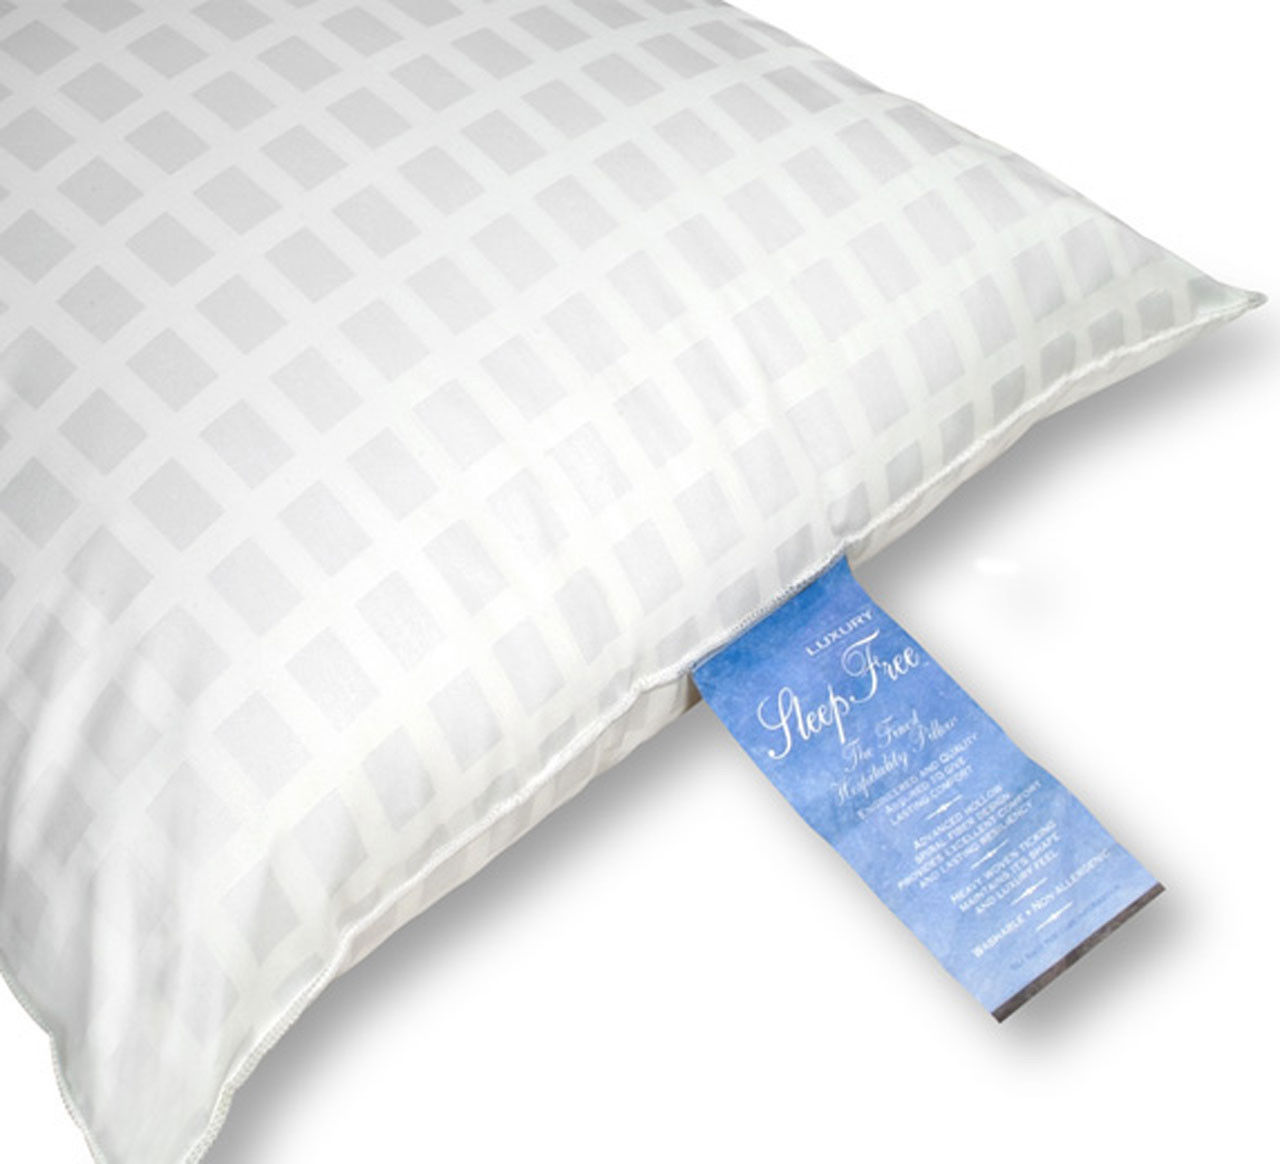 Can you specify the material used in the ticking of the Sleep Free Pillow?